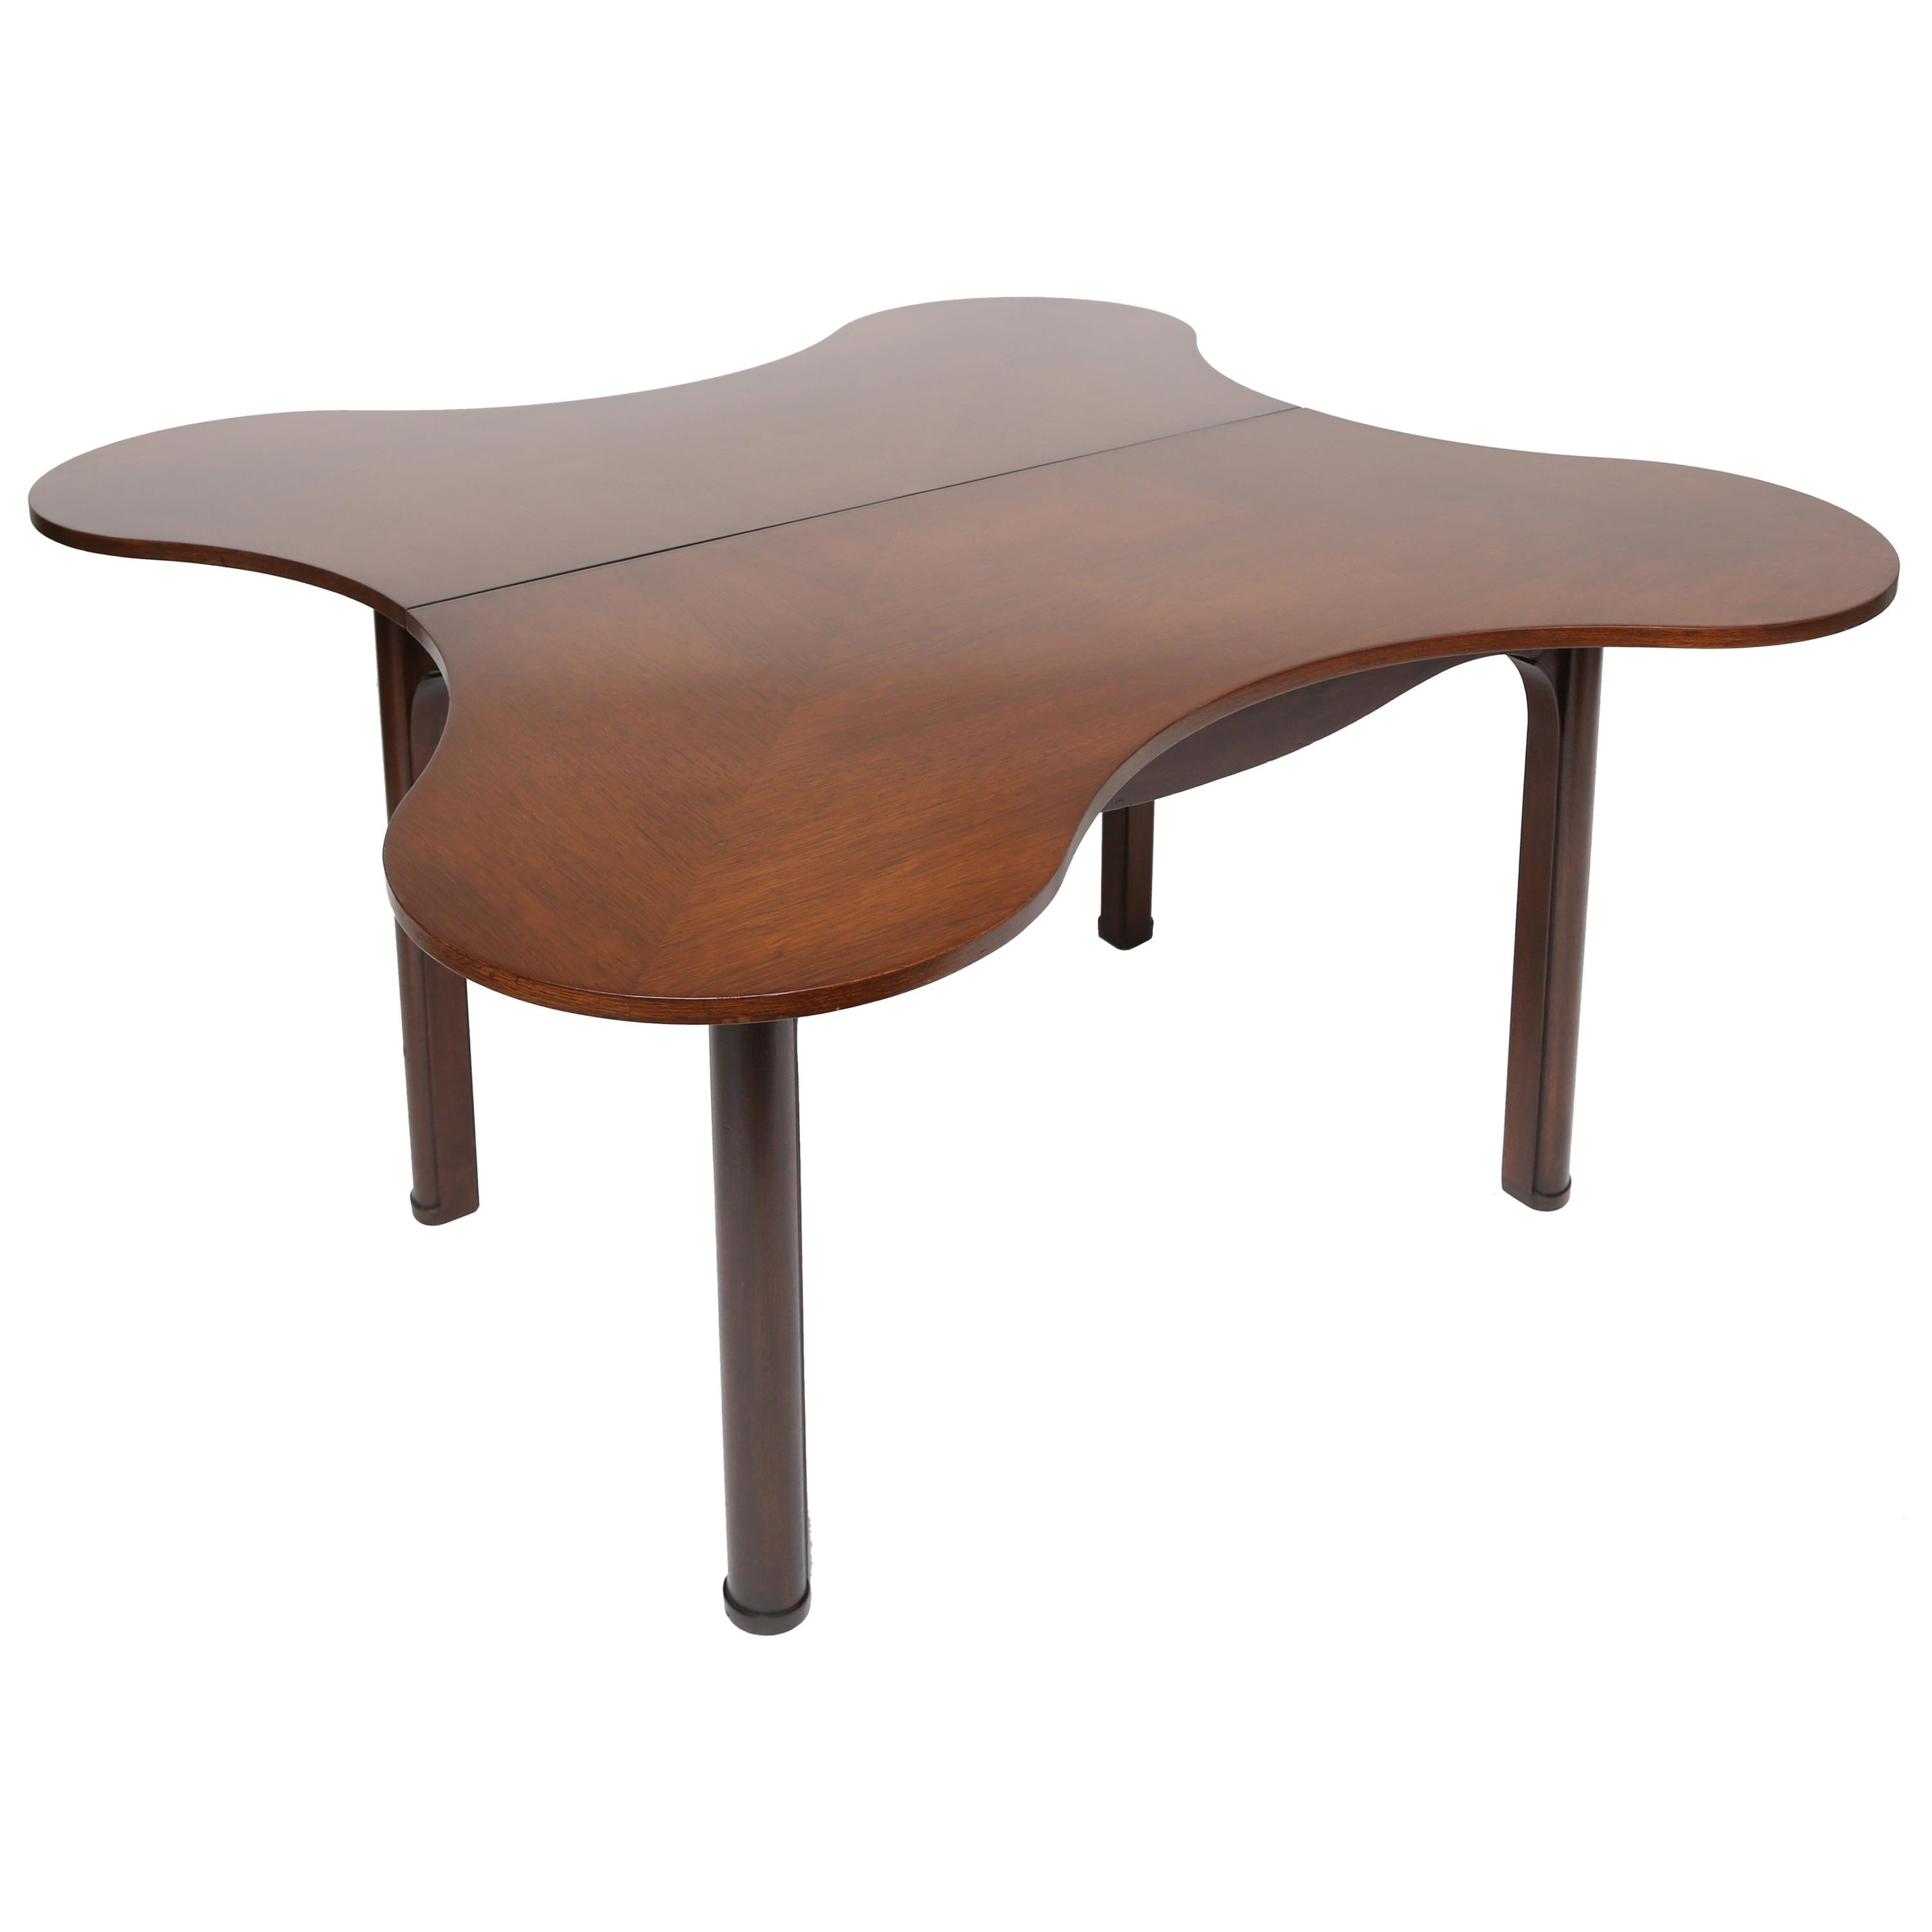 Edward Wormley Special Order Drop-Front Clover Shaped Table